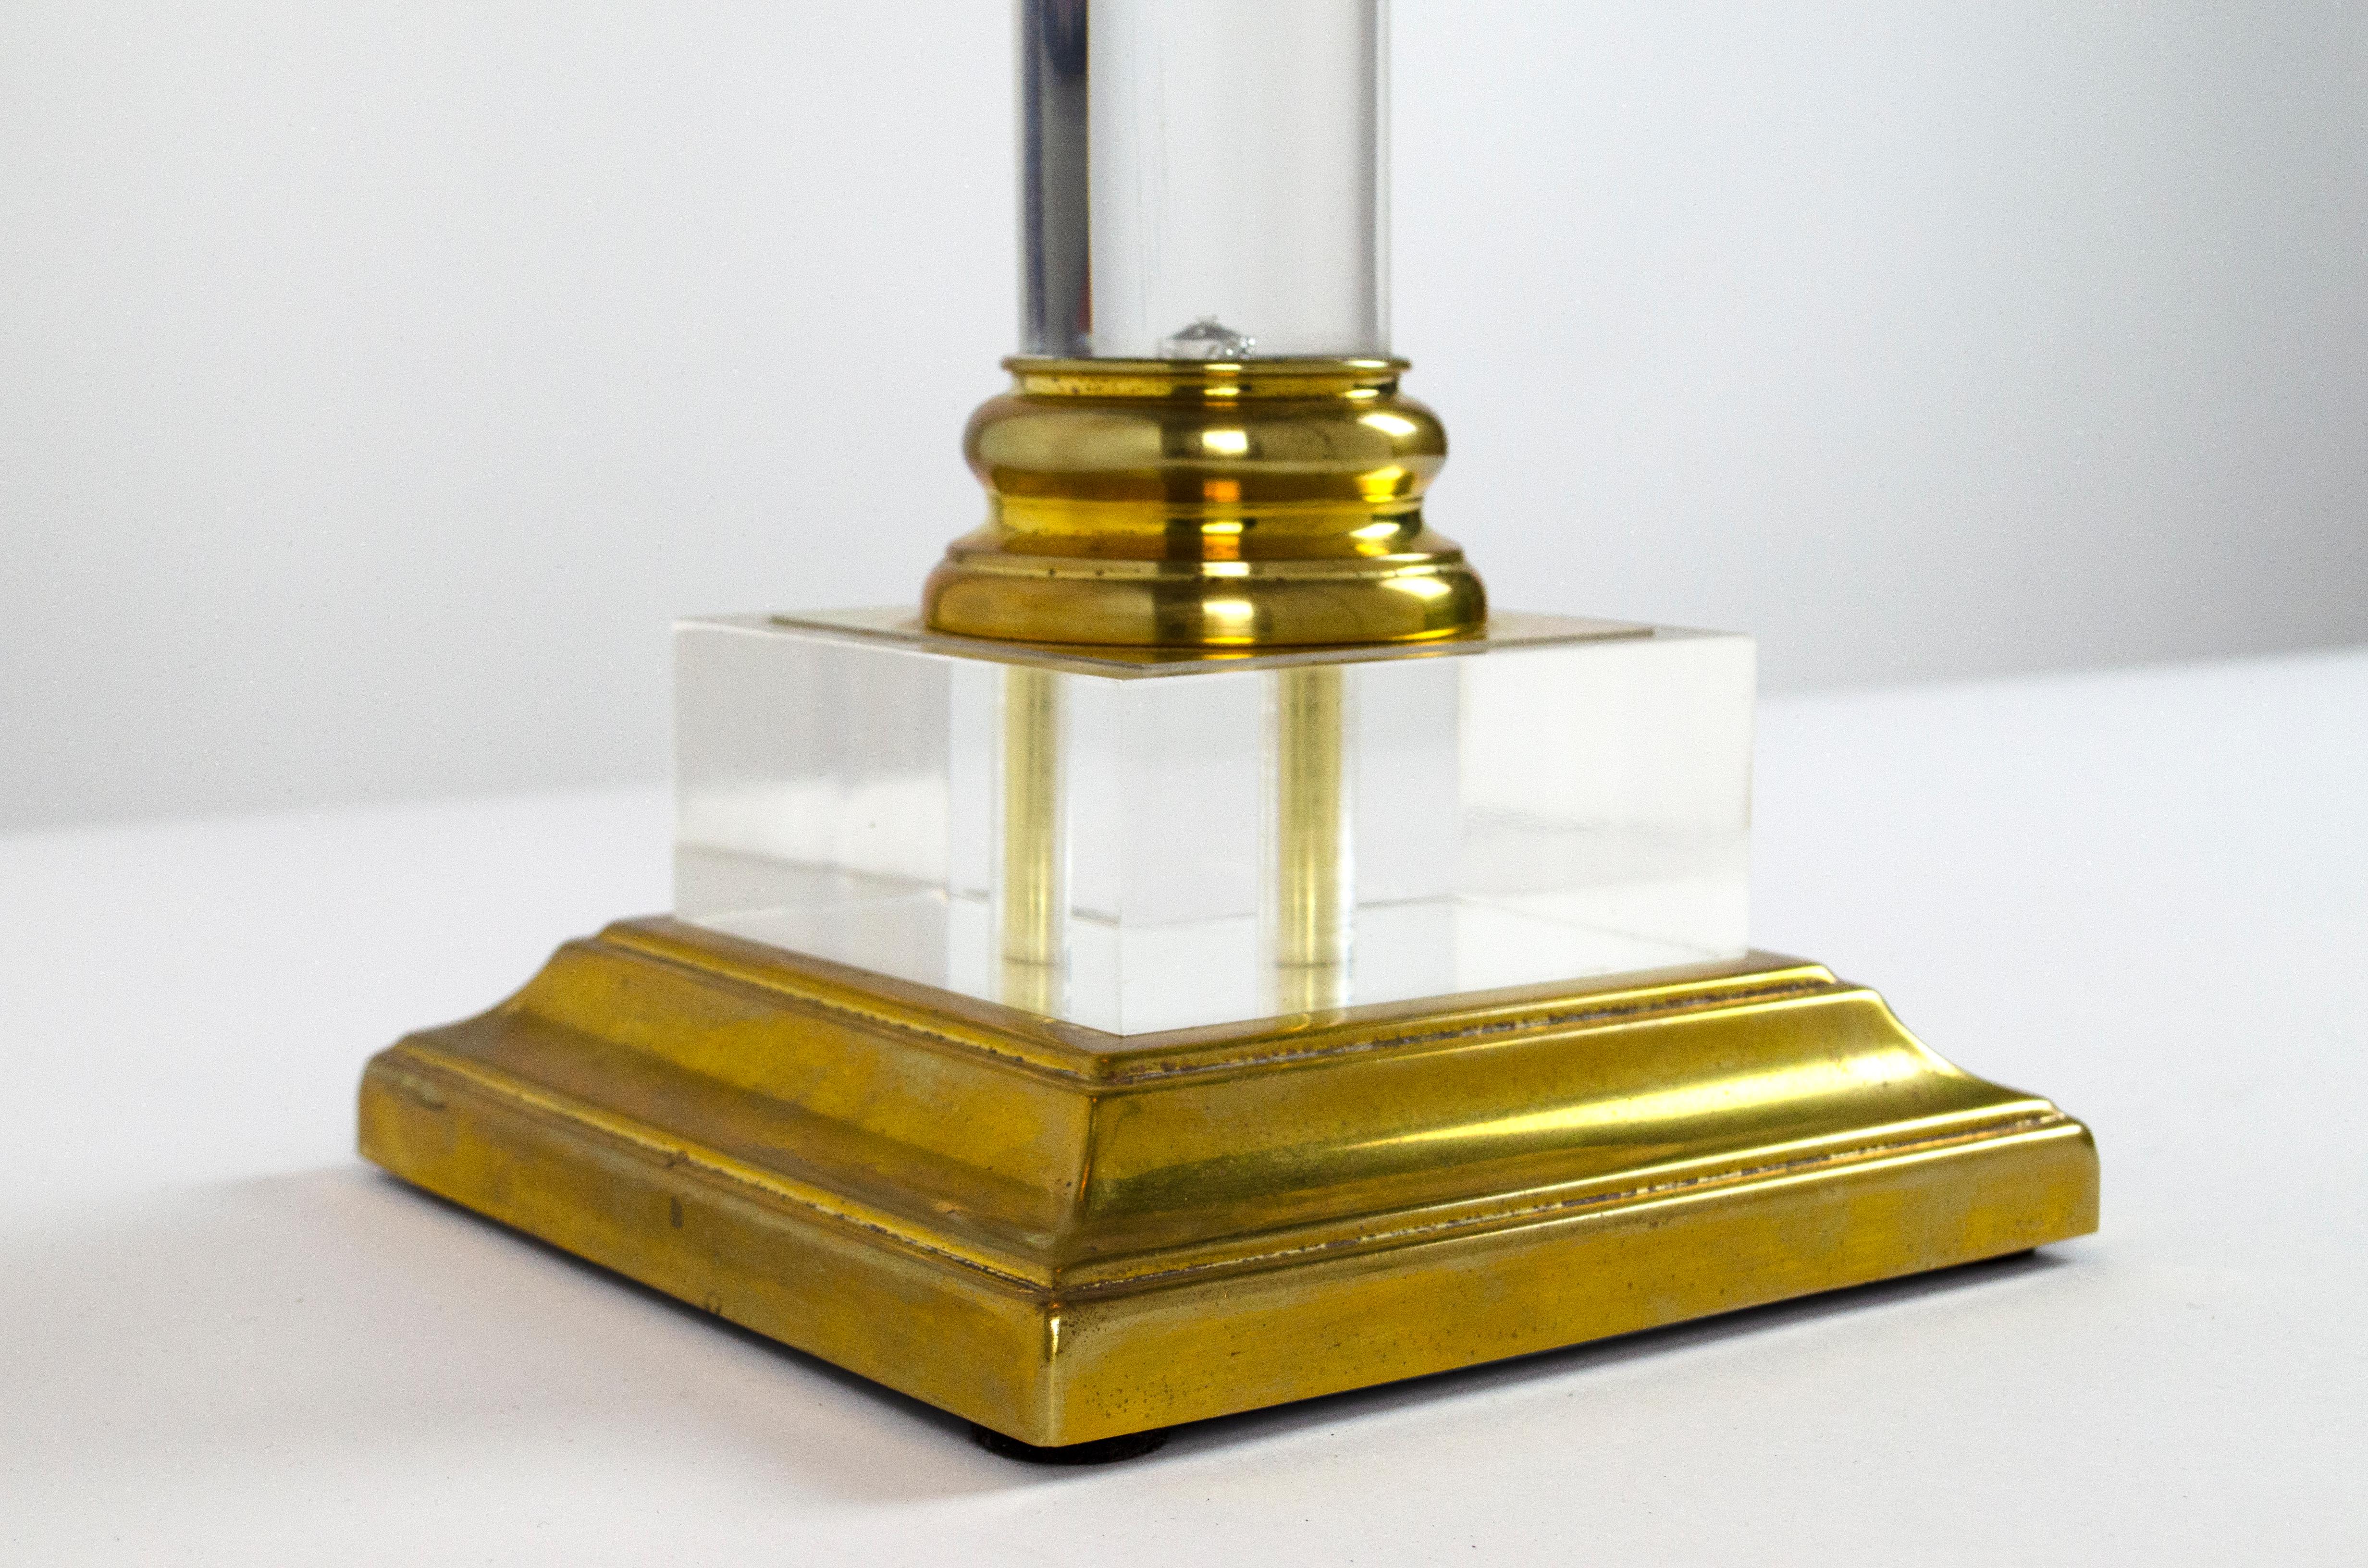 Transparent plexiglass and brass table lamps, Italy, 1970s

Pair of table lamps from Italy from 1970 period. Plexiglass trunks and brass details, squared base and conic lampshade. Restoration of electric system.
Size: Base 17 cm x 17 cm- 6.69291